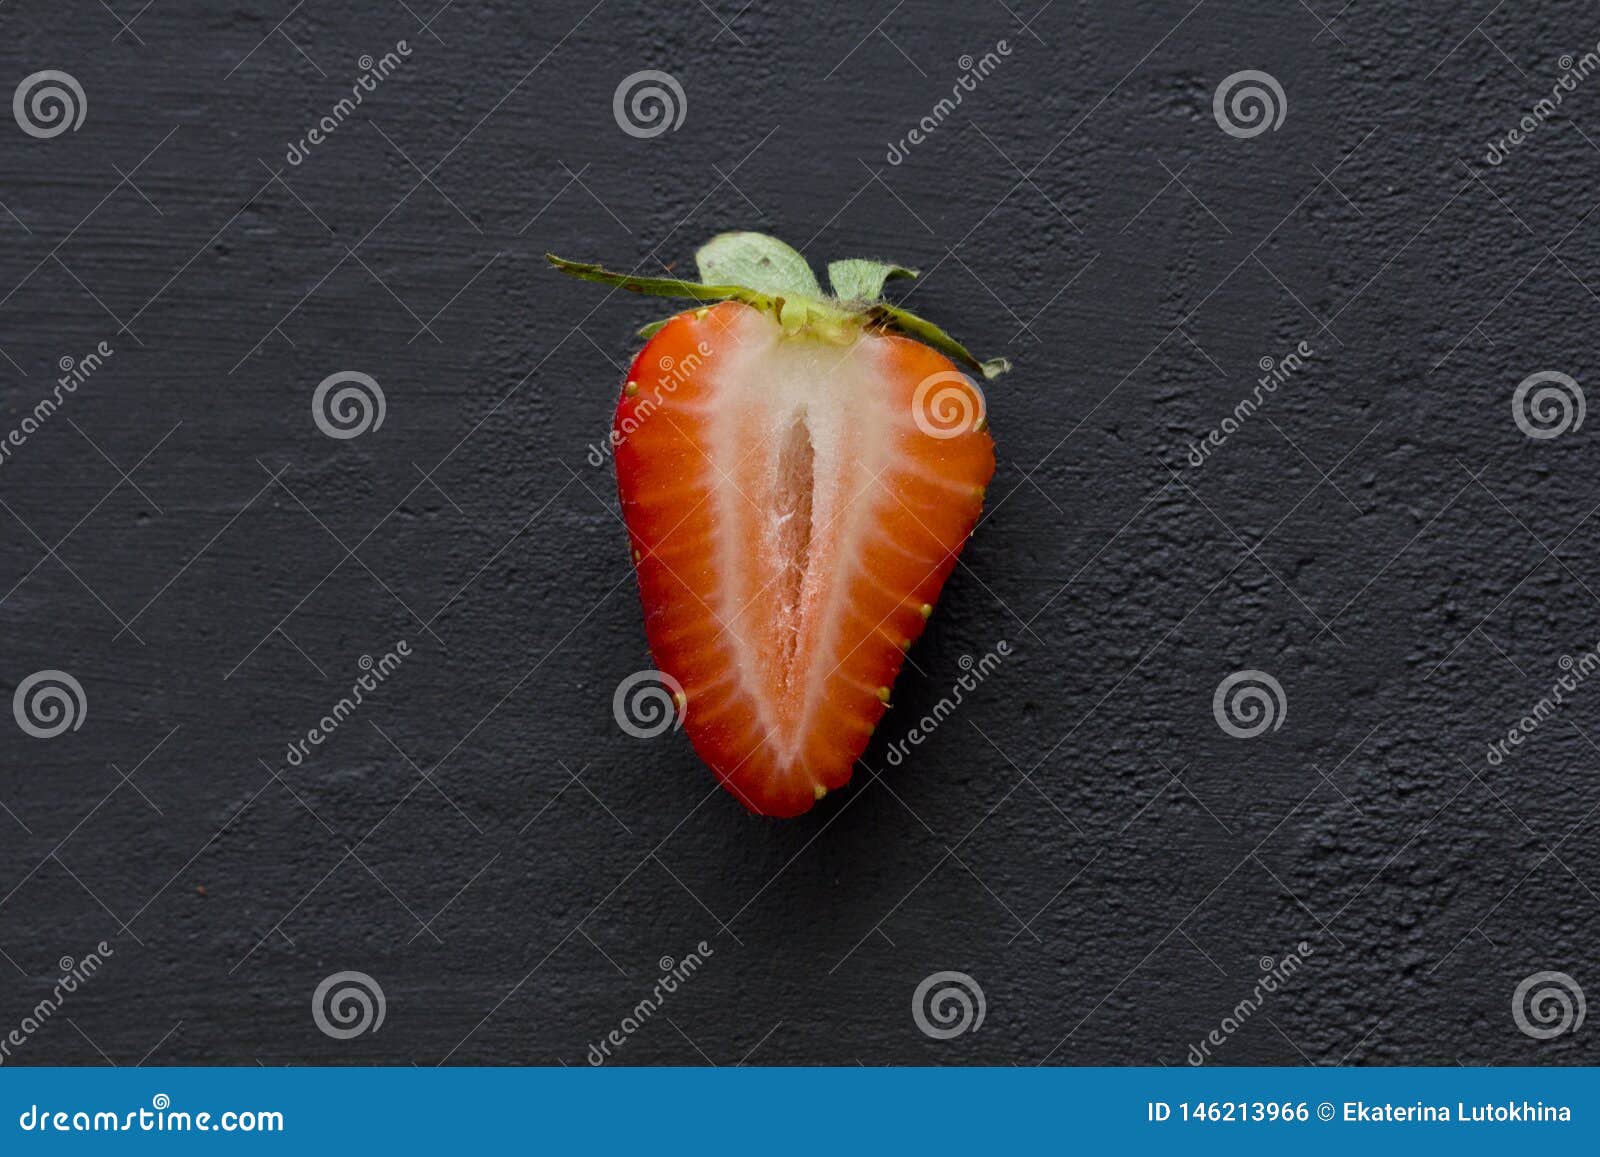 one half of strawberry, cut red beautiful strawberry close-up, on a black dark concrete background. macro shooting. fruit erotica